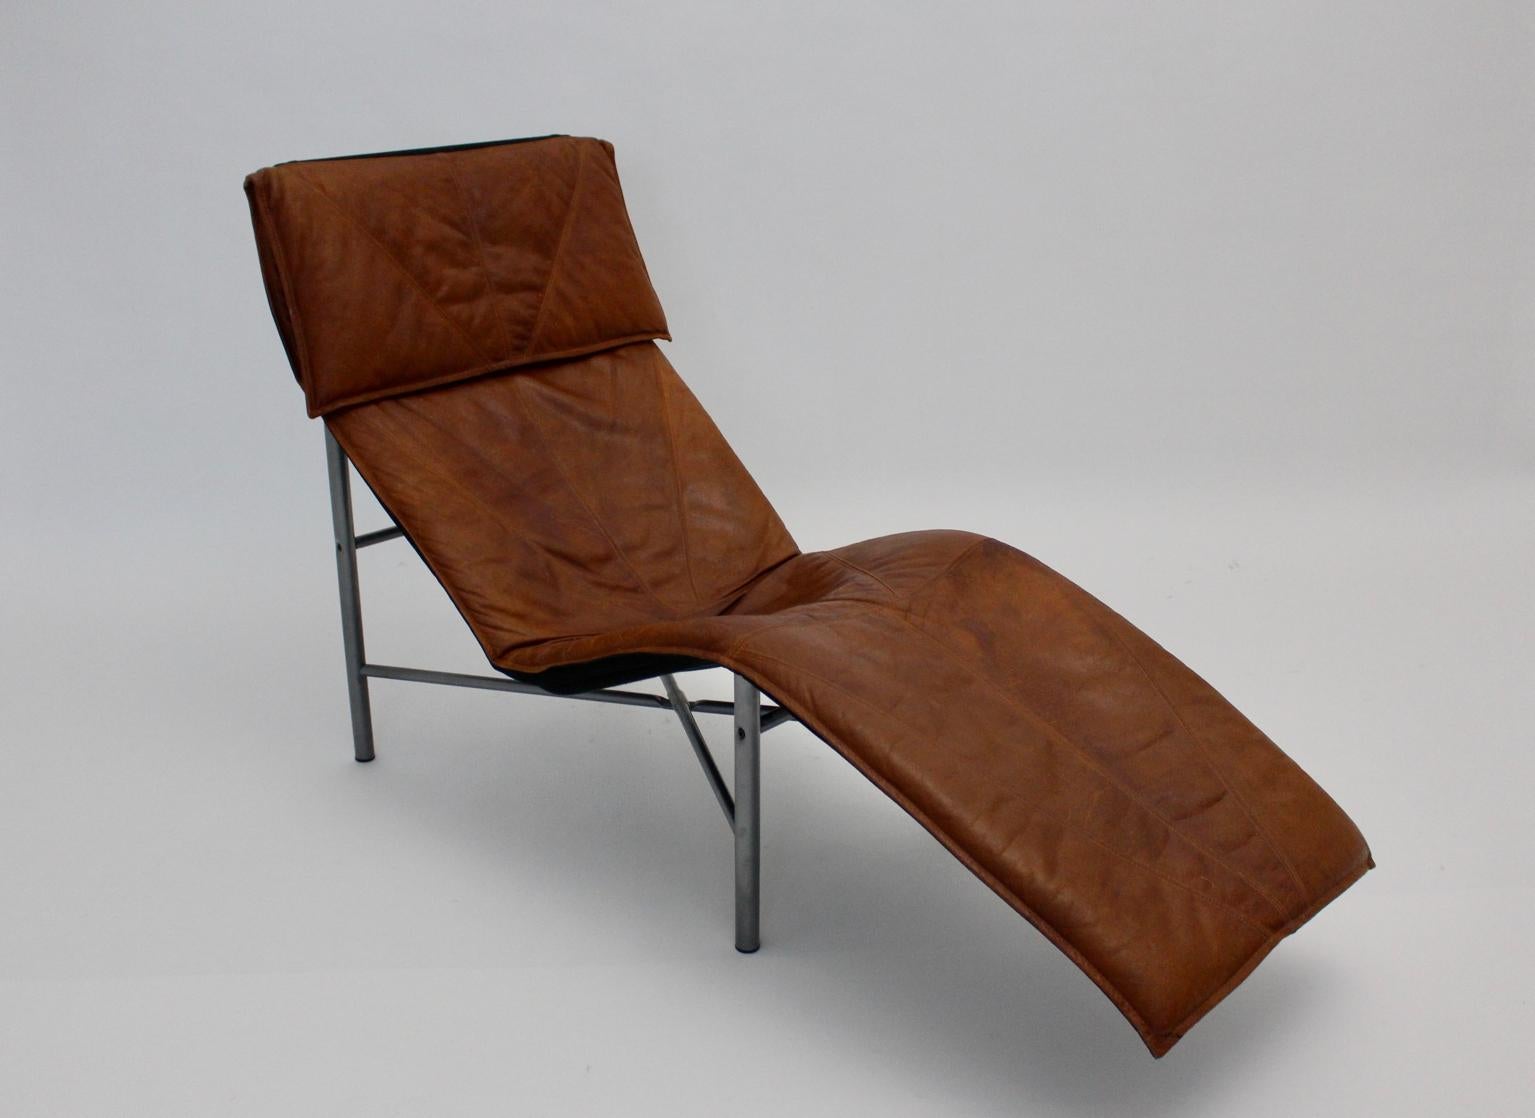 Lacquered Vintage Cognac Leather Chaise Longue by Tord Bjorklund Sweden, 1970 For Sale